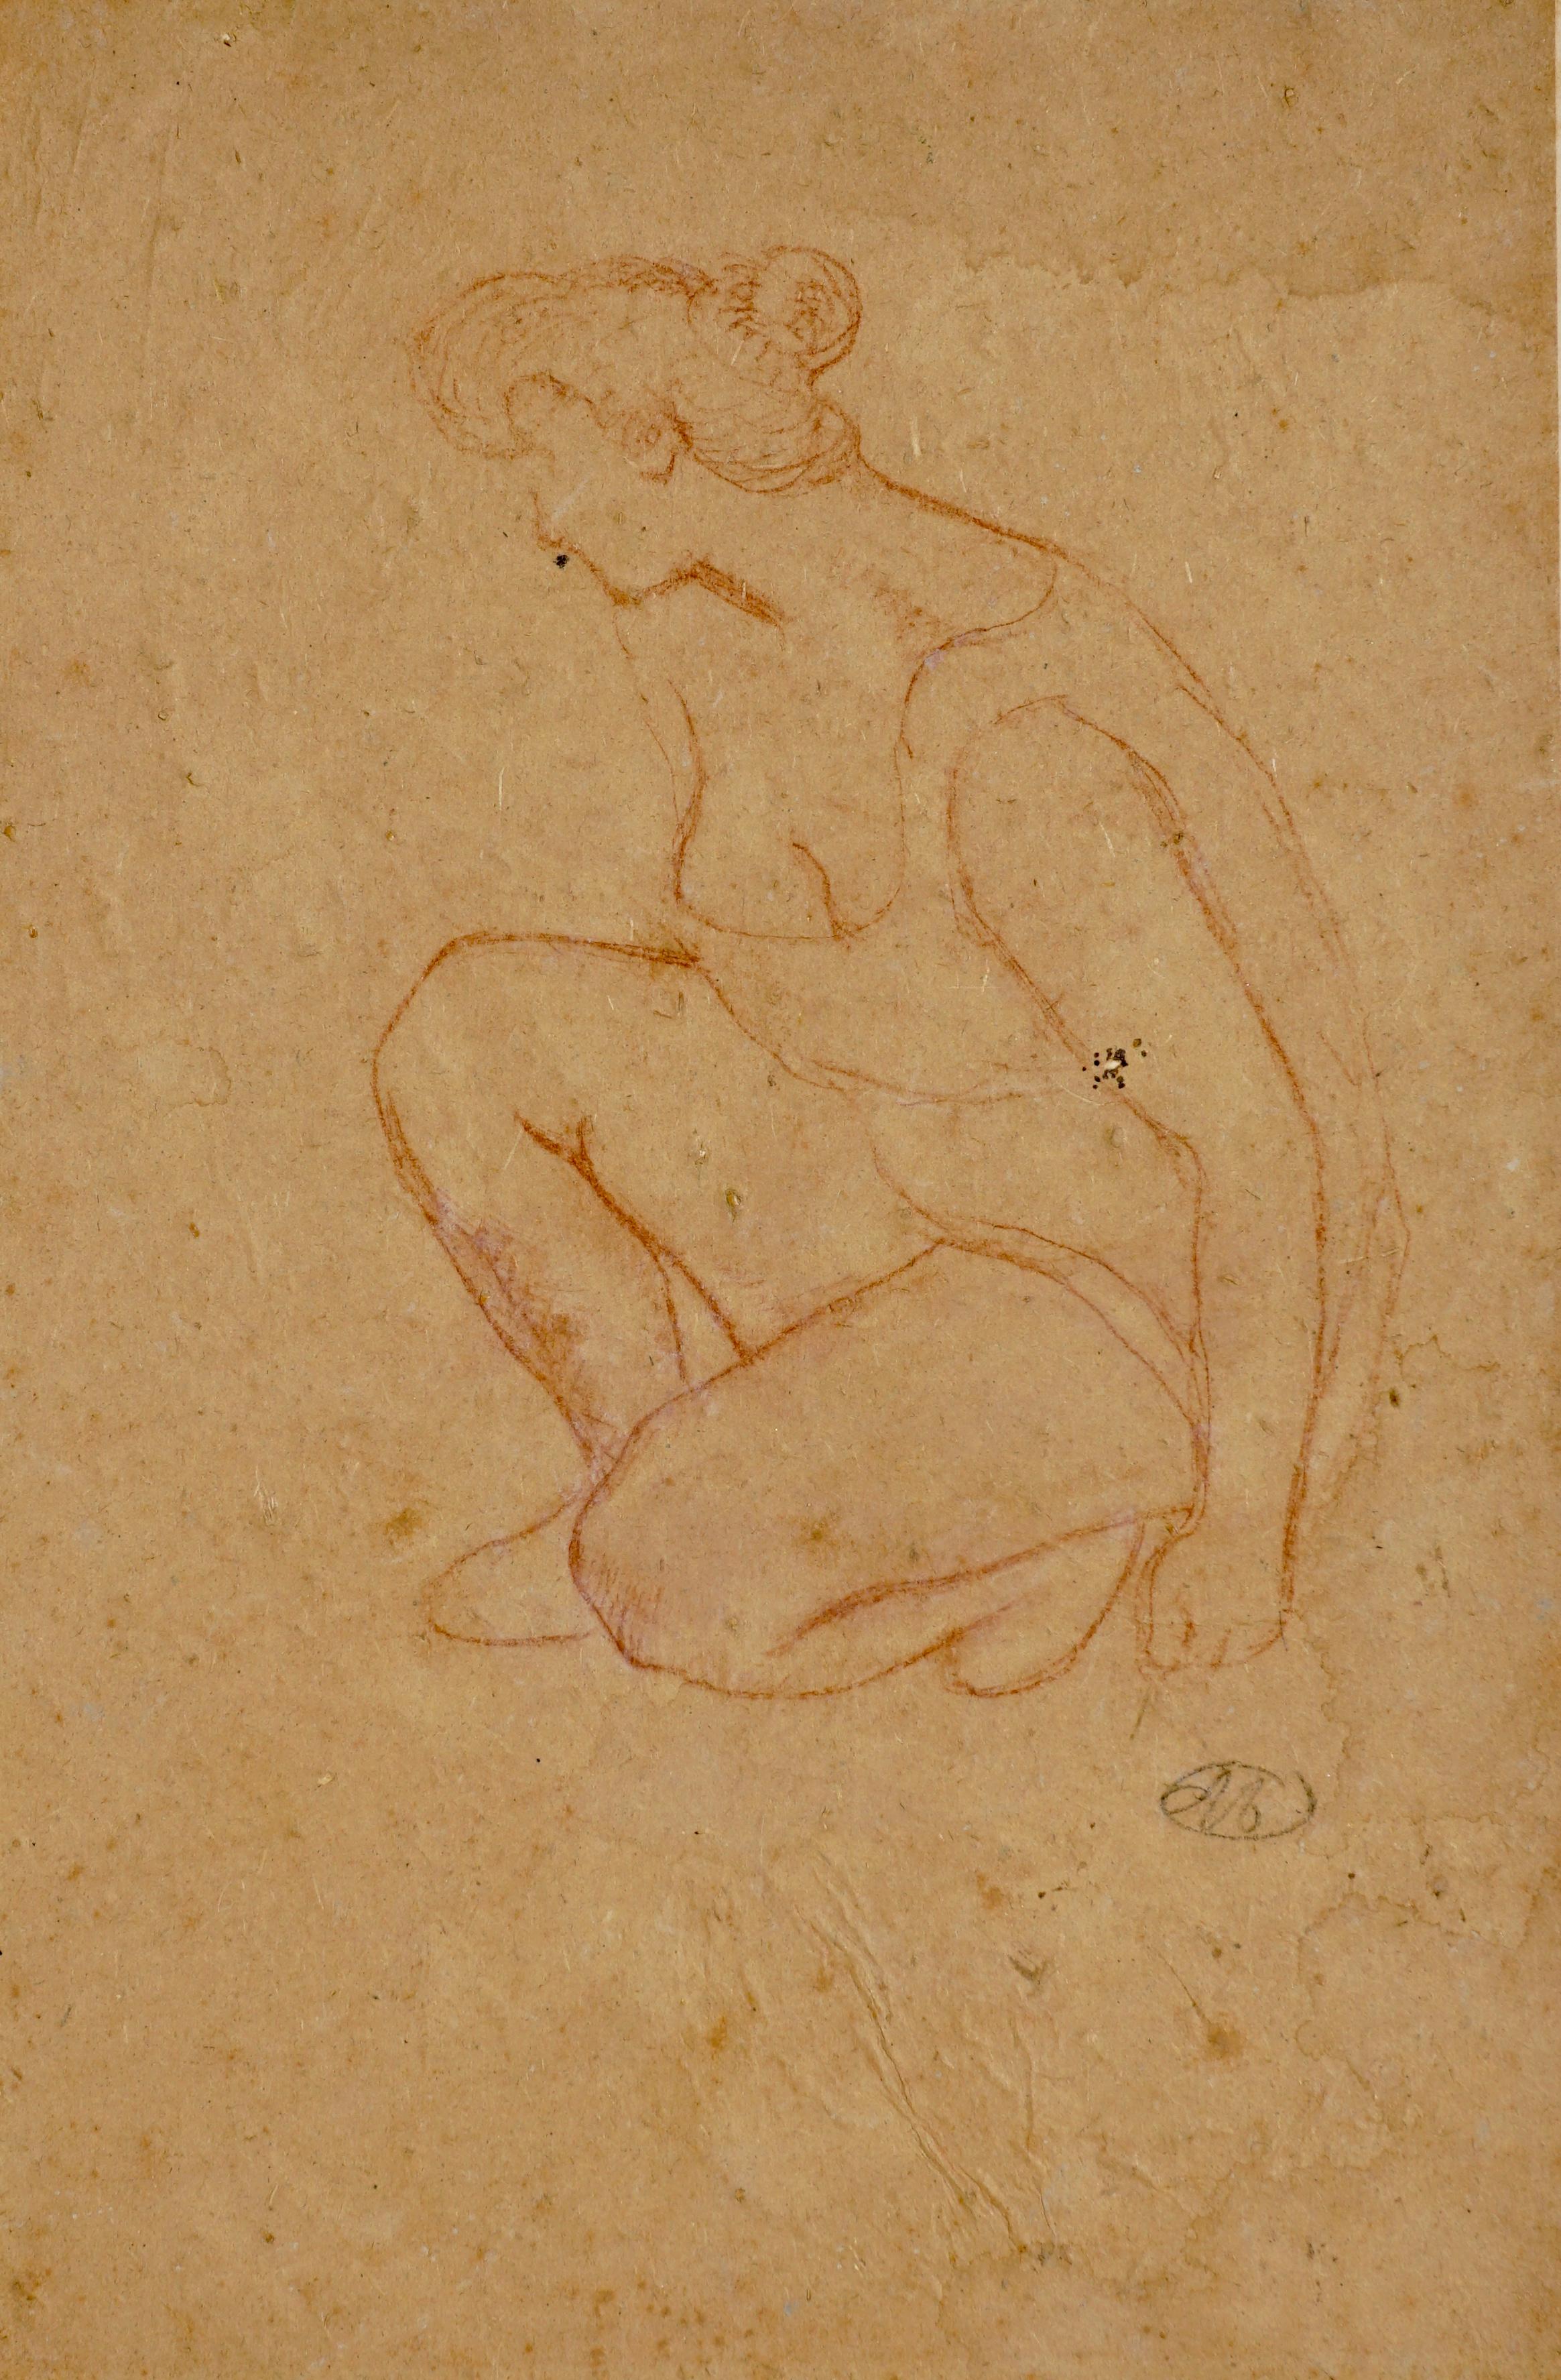 Aristide Maillol painting sketch or study of a Kneeling Woman, red crayon sanguine on buff paper; signed lower right in black crayon with monogram 